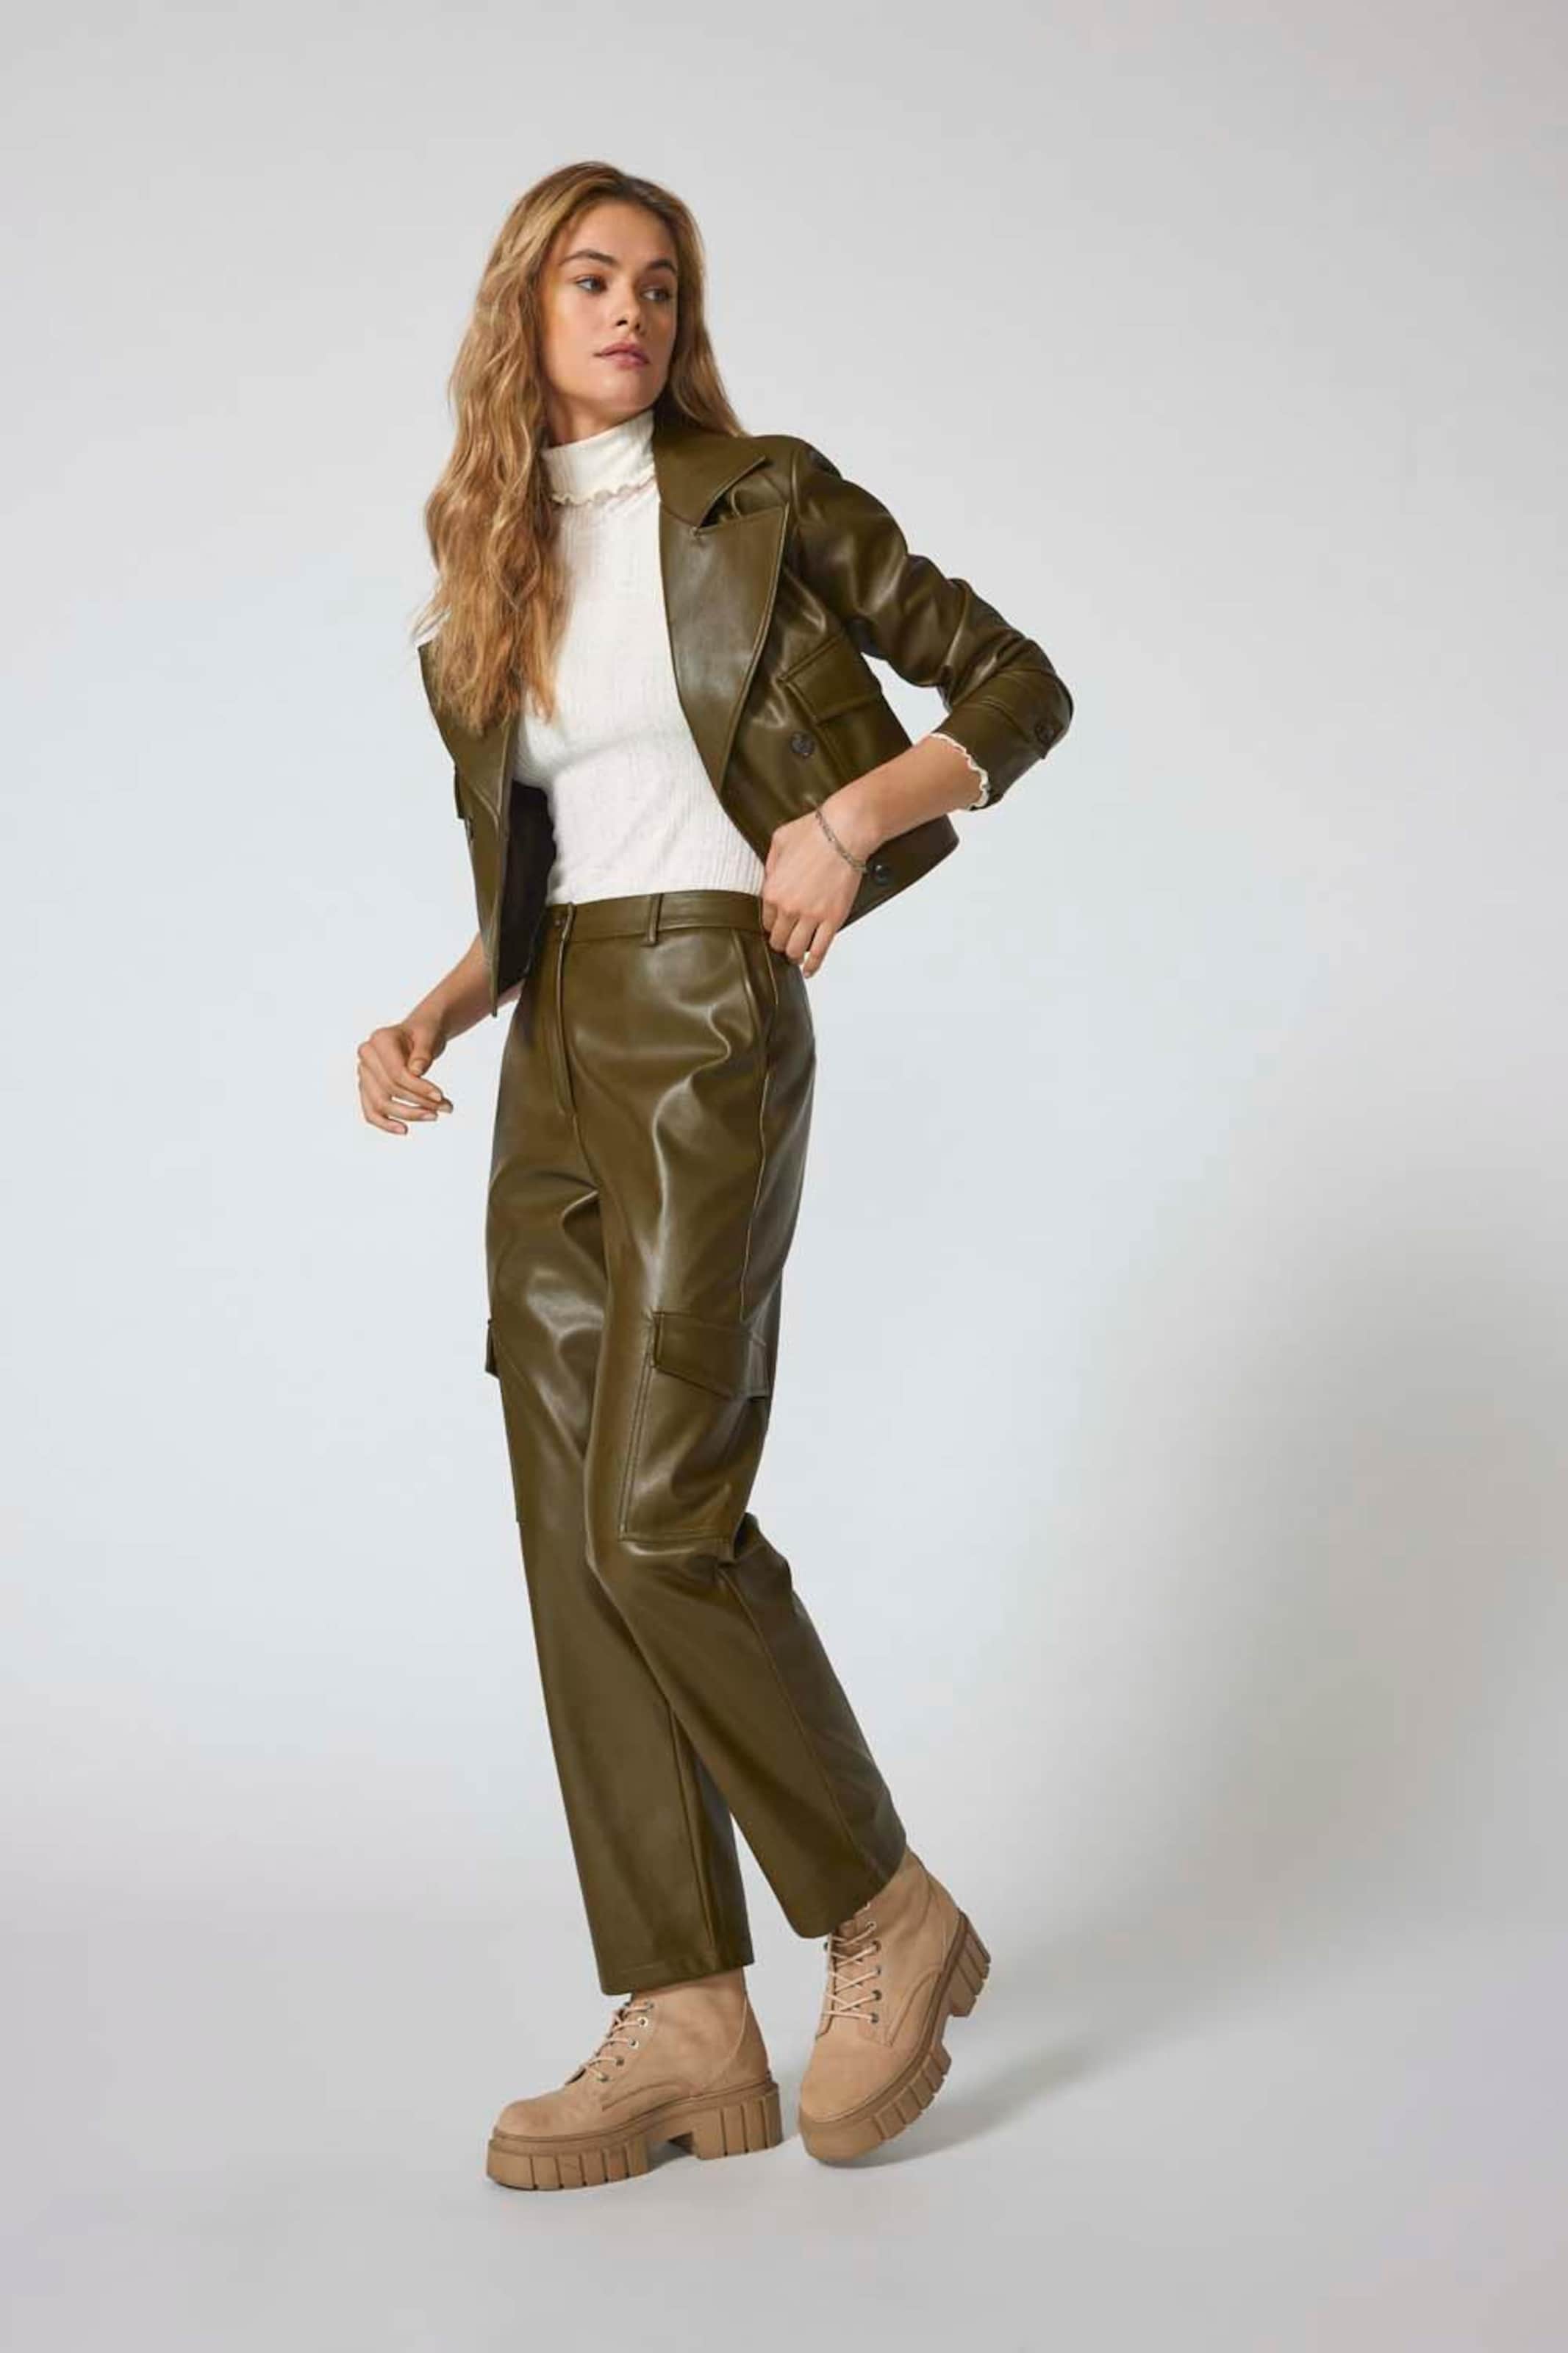 Women's Leather Pants | Explore our New Arrivals | ZARA United States